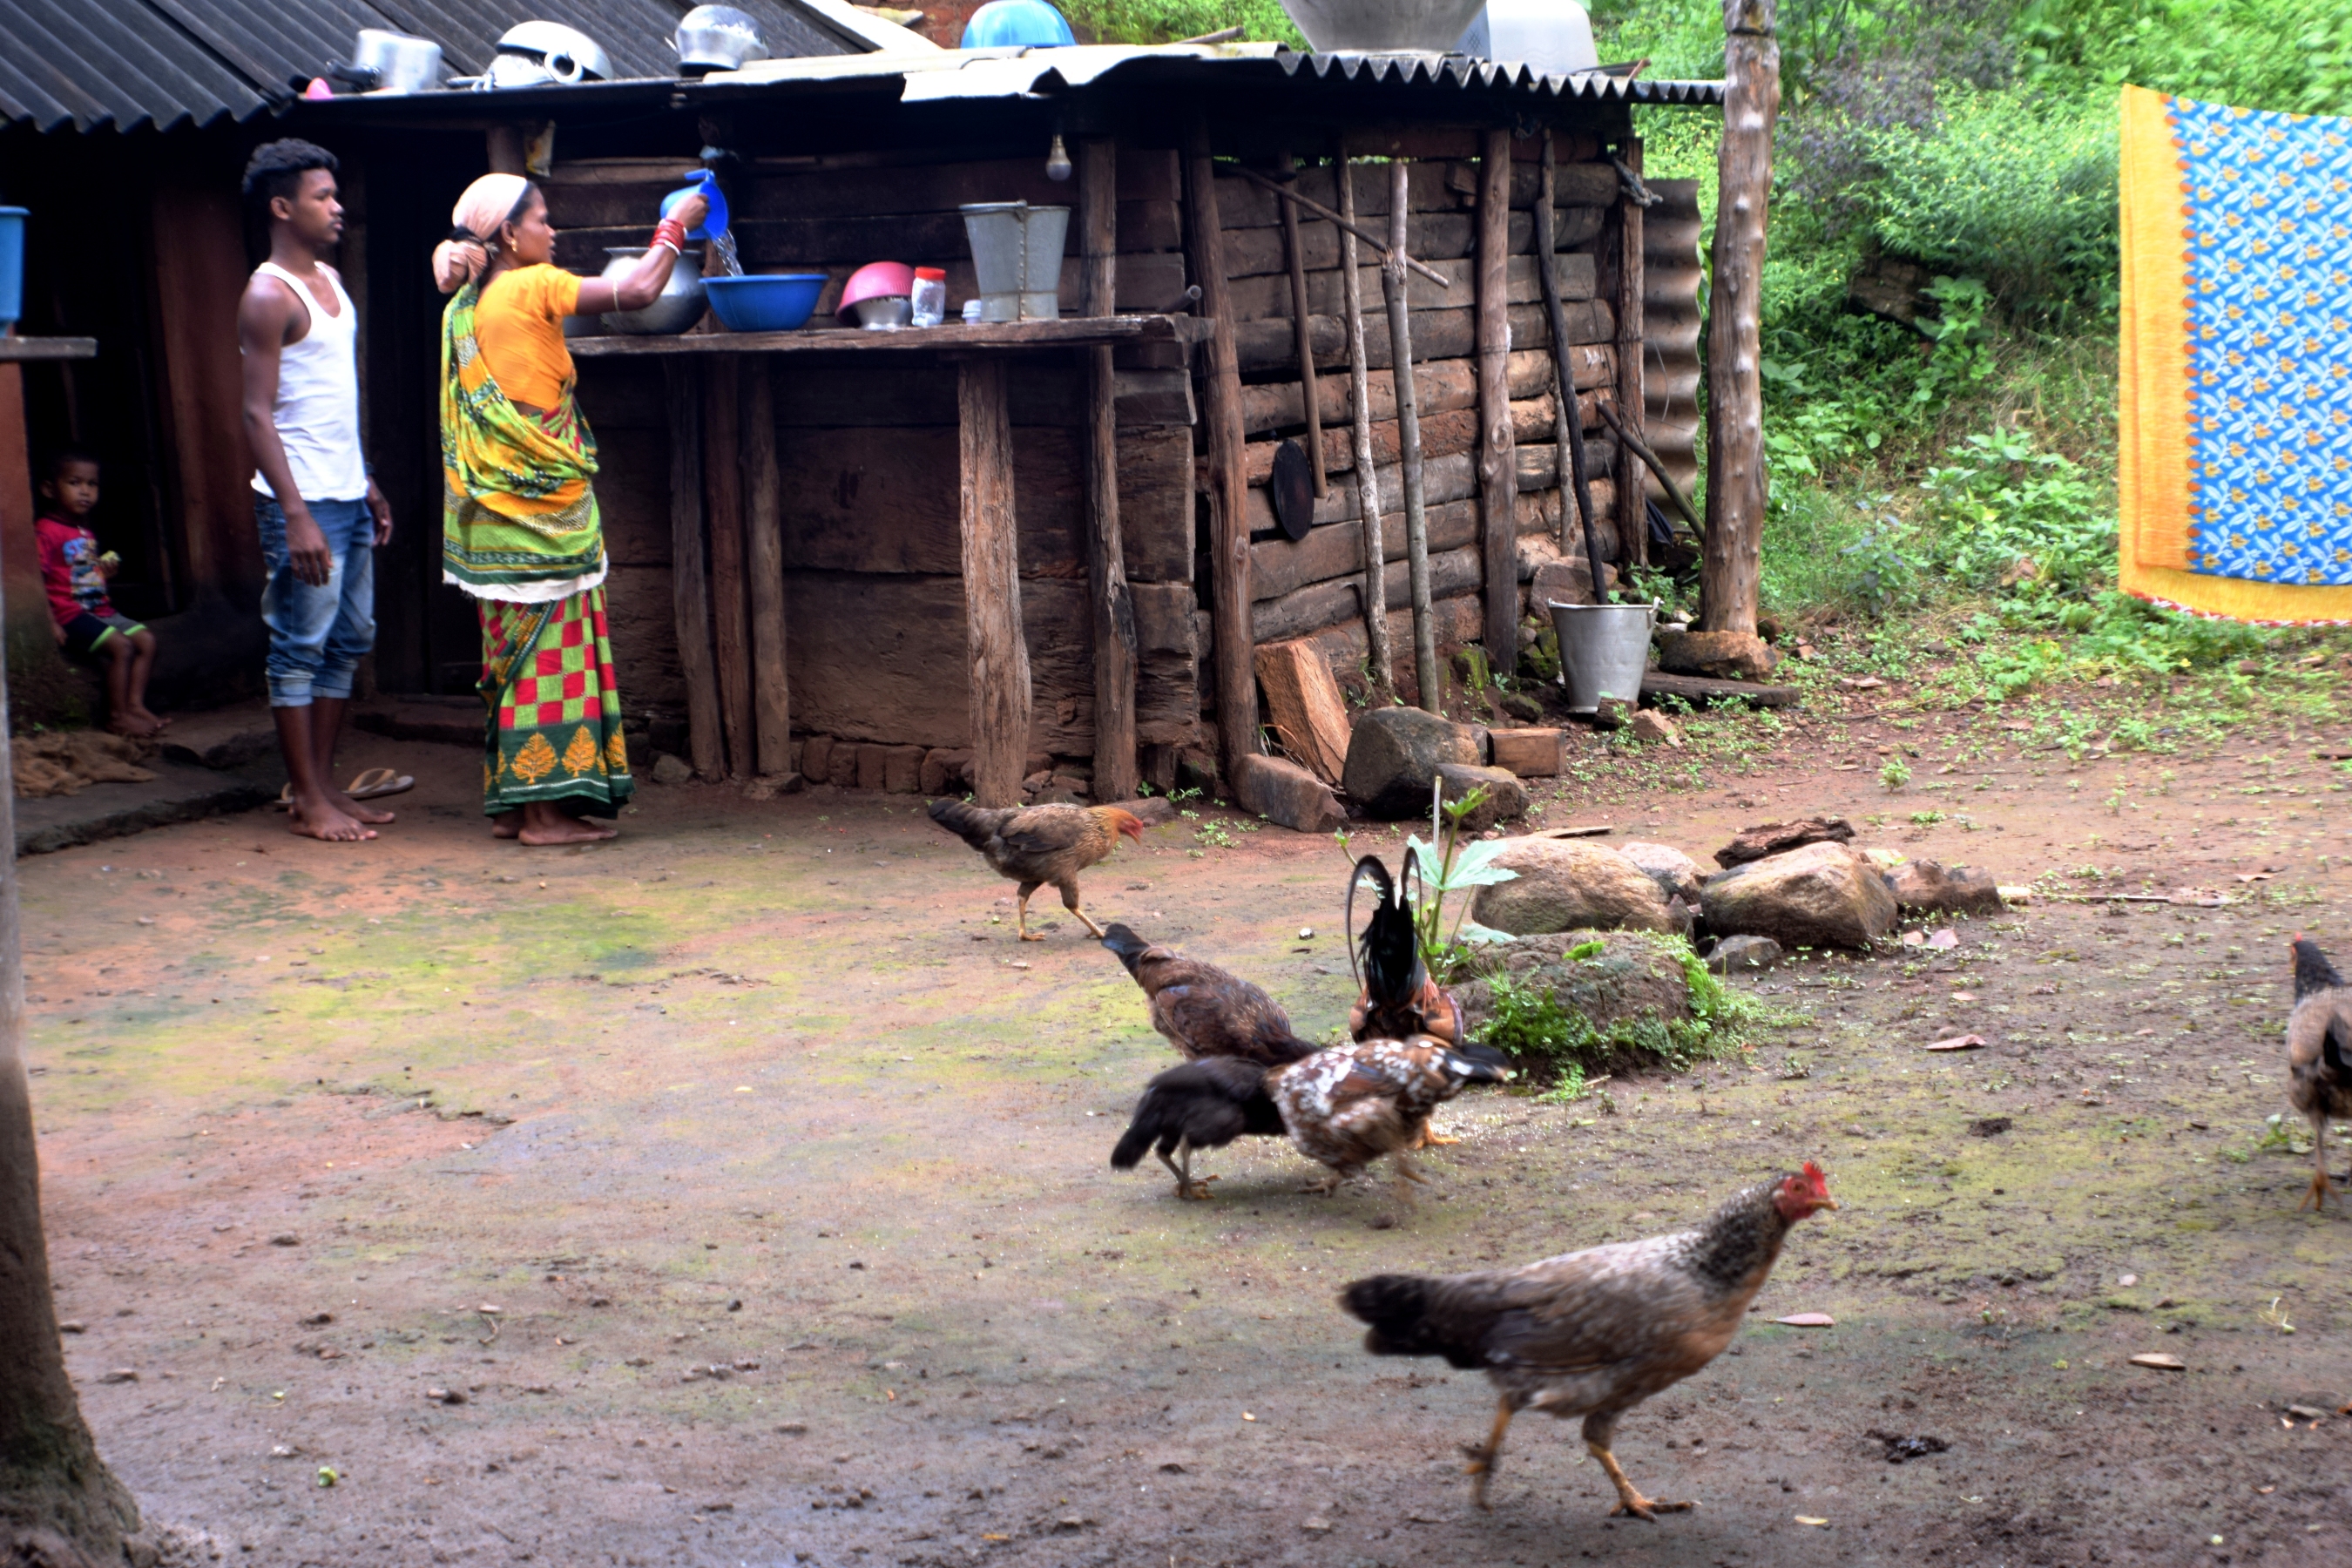 two villagers stand outside a wooden hut with chickens in the yard pecking